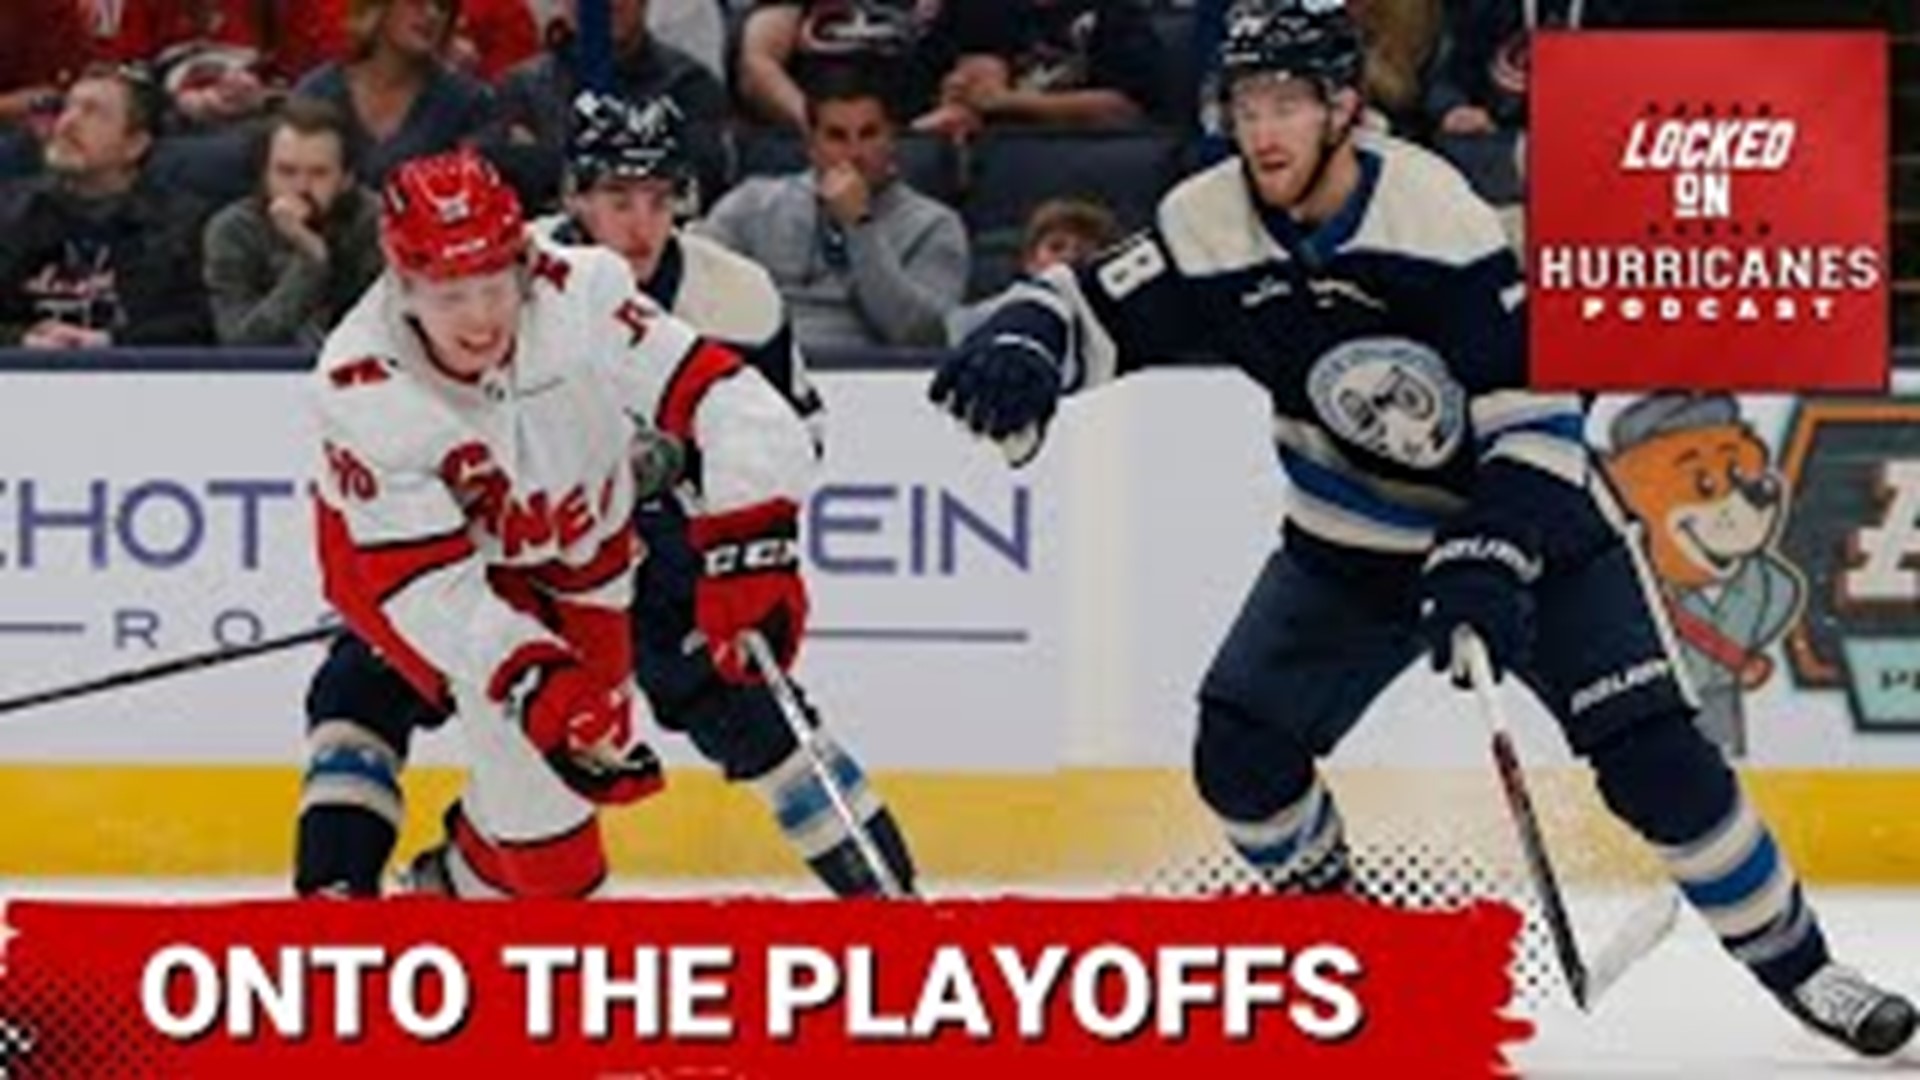 With the Canes' playoff spot secured, Jackson Blake and Bradly Nadeau made their NHL debuts in the season finale. That and more on Locked On Hurricanes.